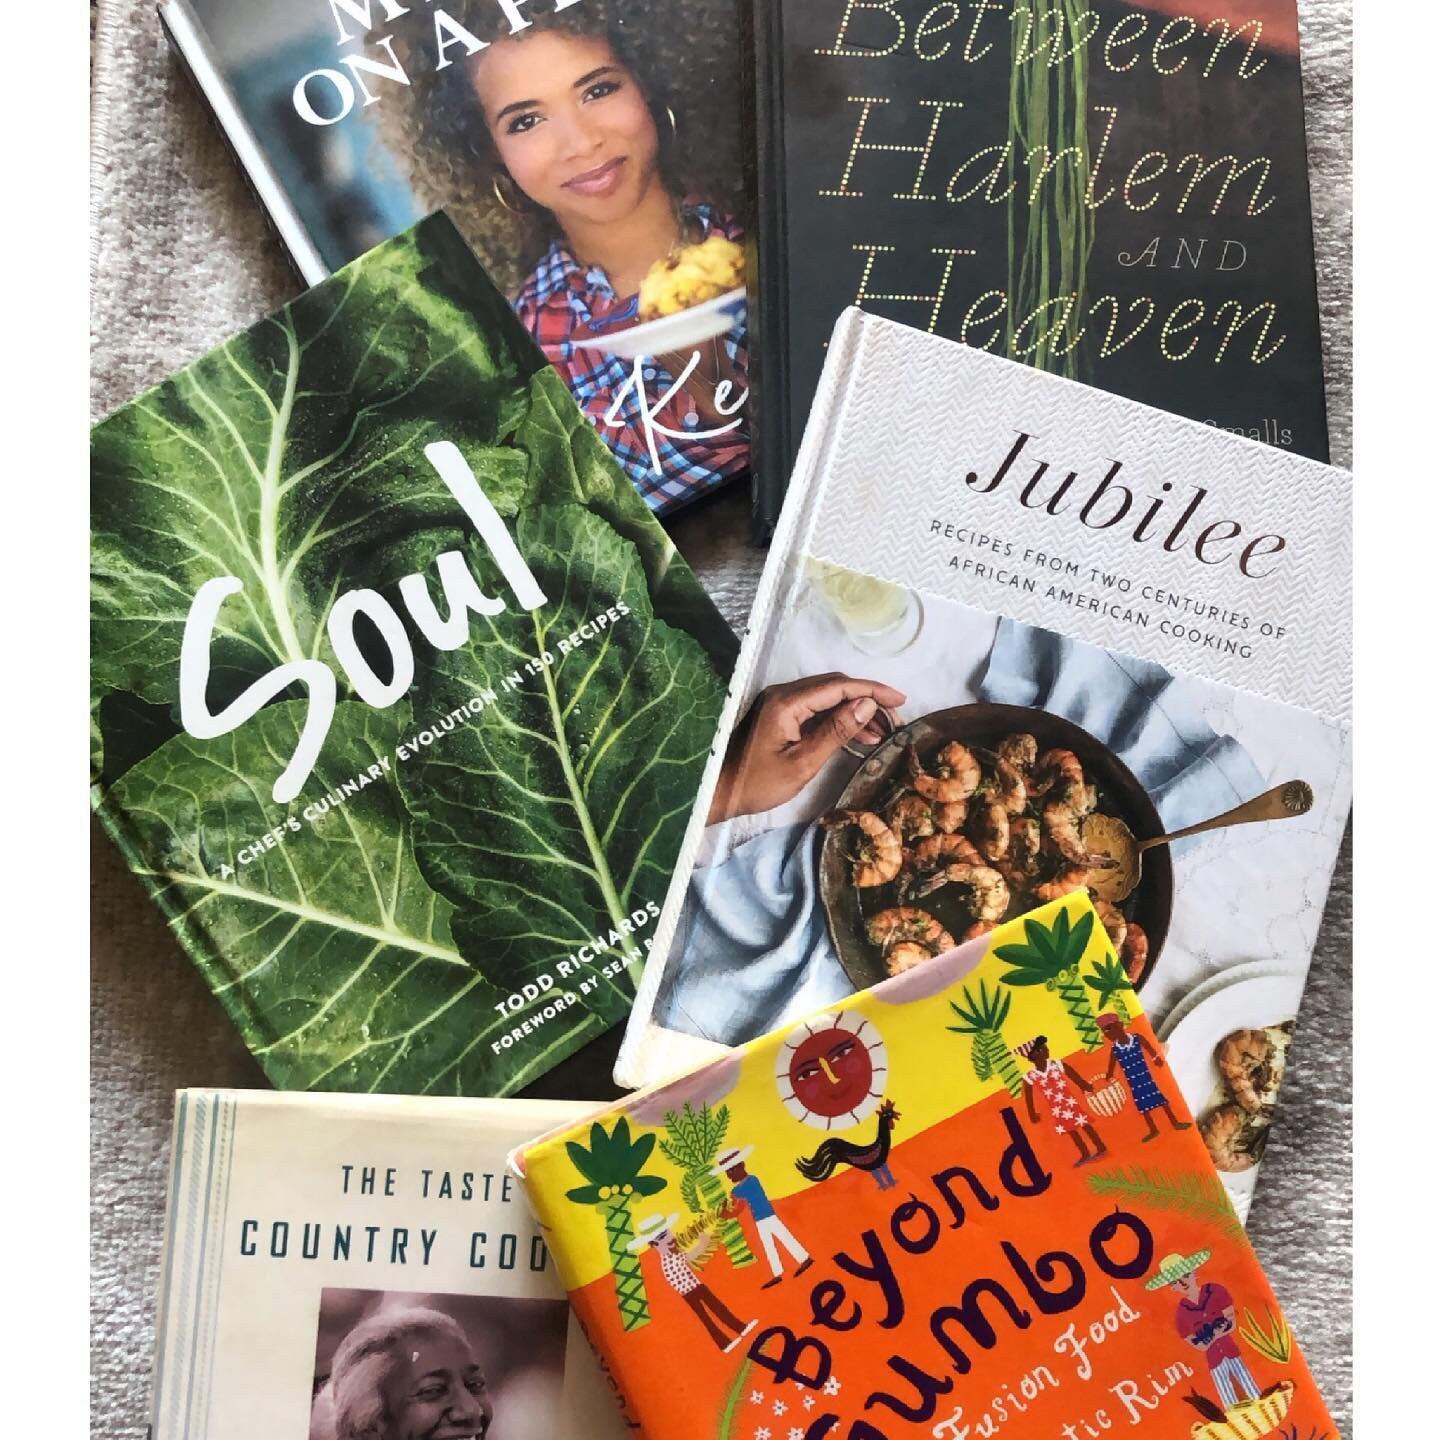 Ahead of Juneteenth, I&rsquo;d love to share some of my favorite cookbooks that I return to again and again by Black authors. Now more than ever, it is so fulfilling to be able to celebrate Black foodways! Check them out!

Pictured from left to right